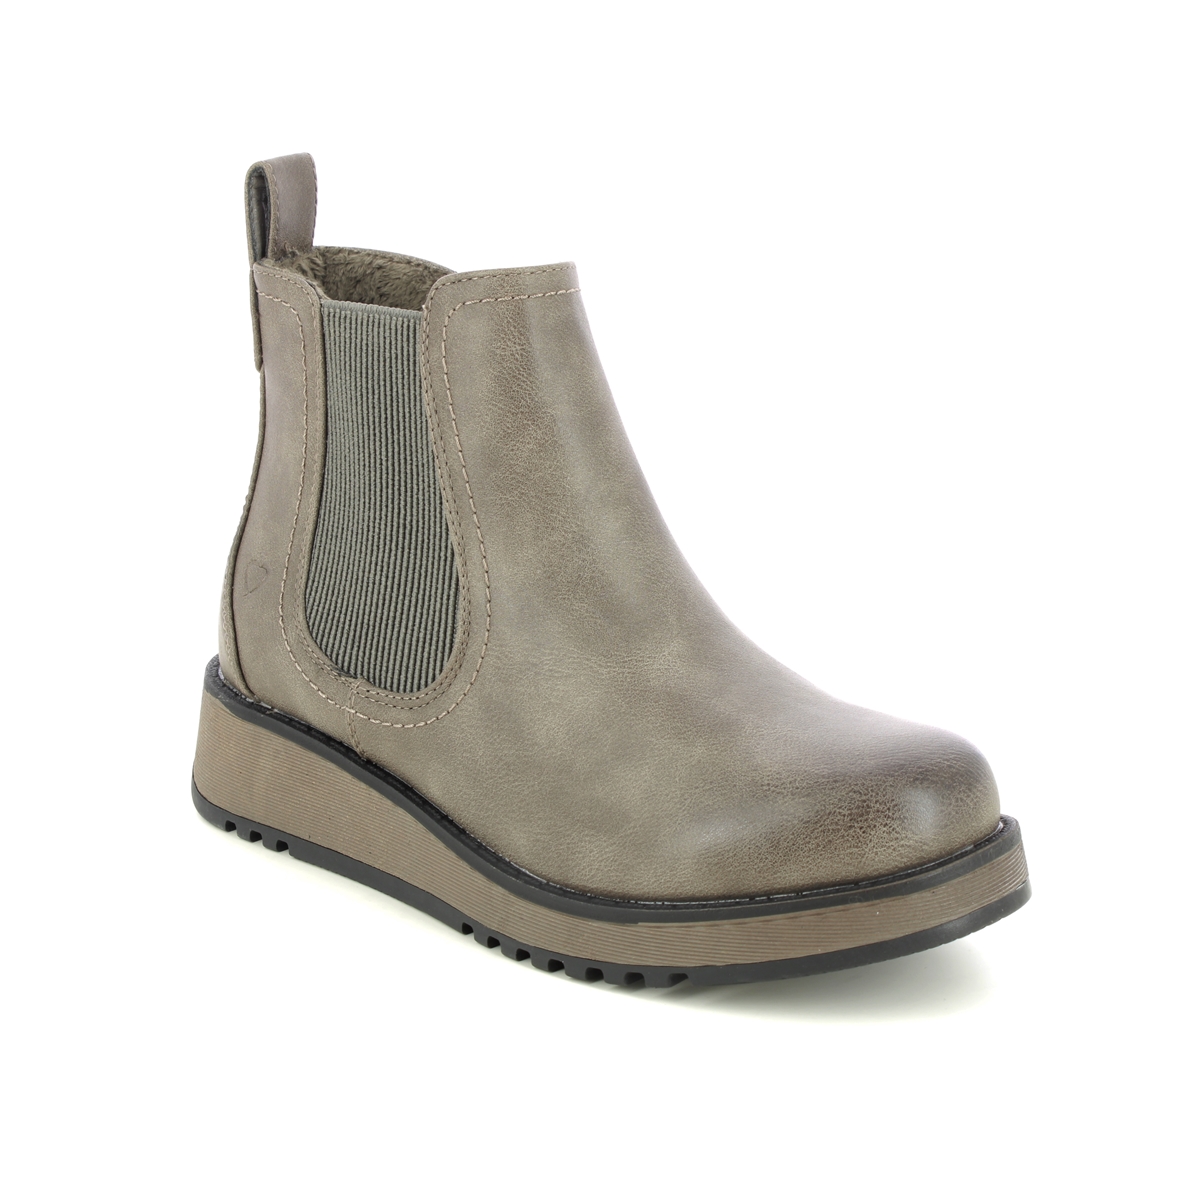 Heavenly Feet Rolo   2 New Dark Taupe Womens Chelsea Boots 3503-50 In Size 8 In Plain Dark Taupe